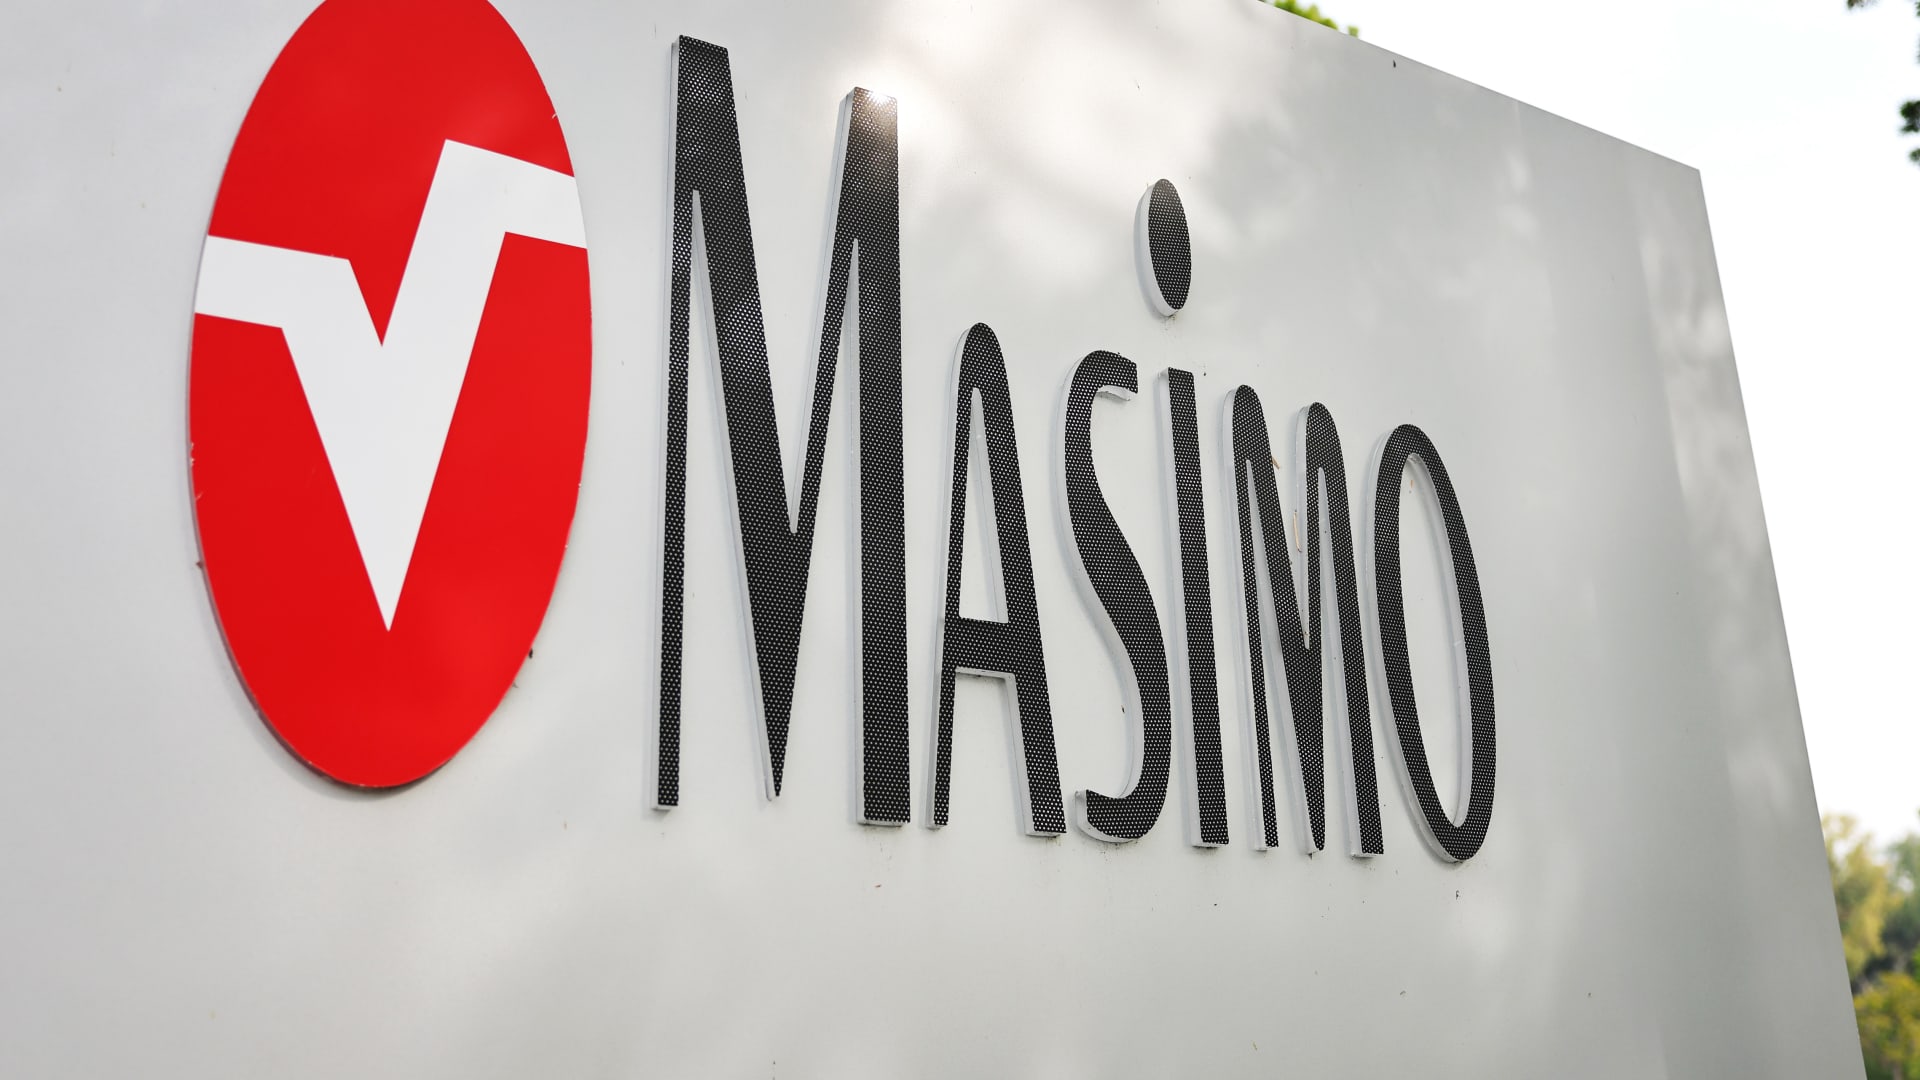 Masimo seeks to stave off proxy fight with Politan, makes settlement give